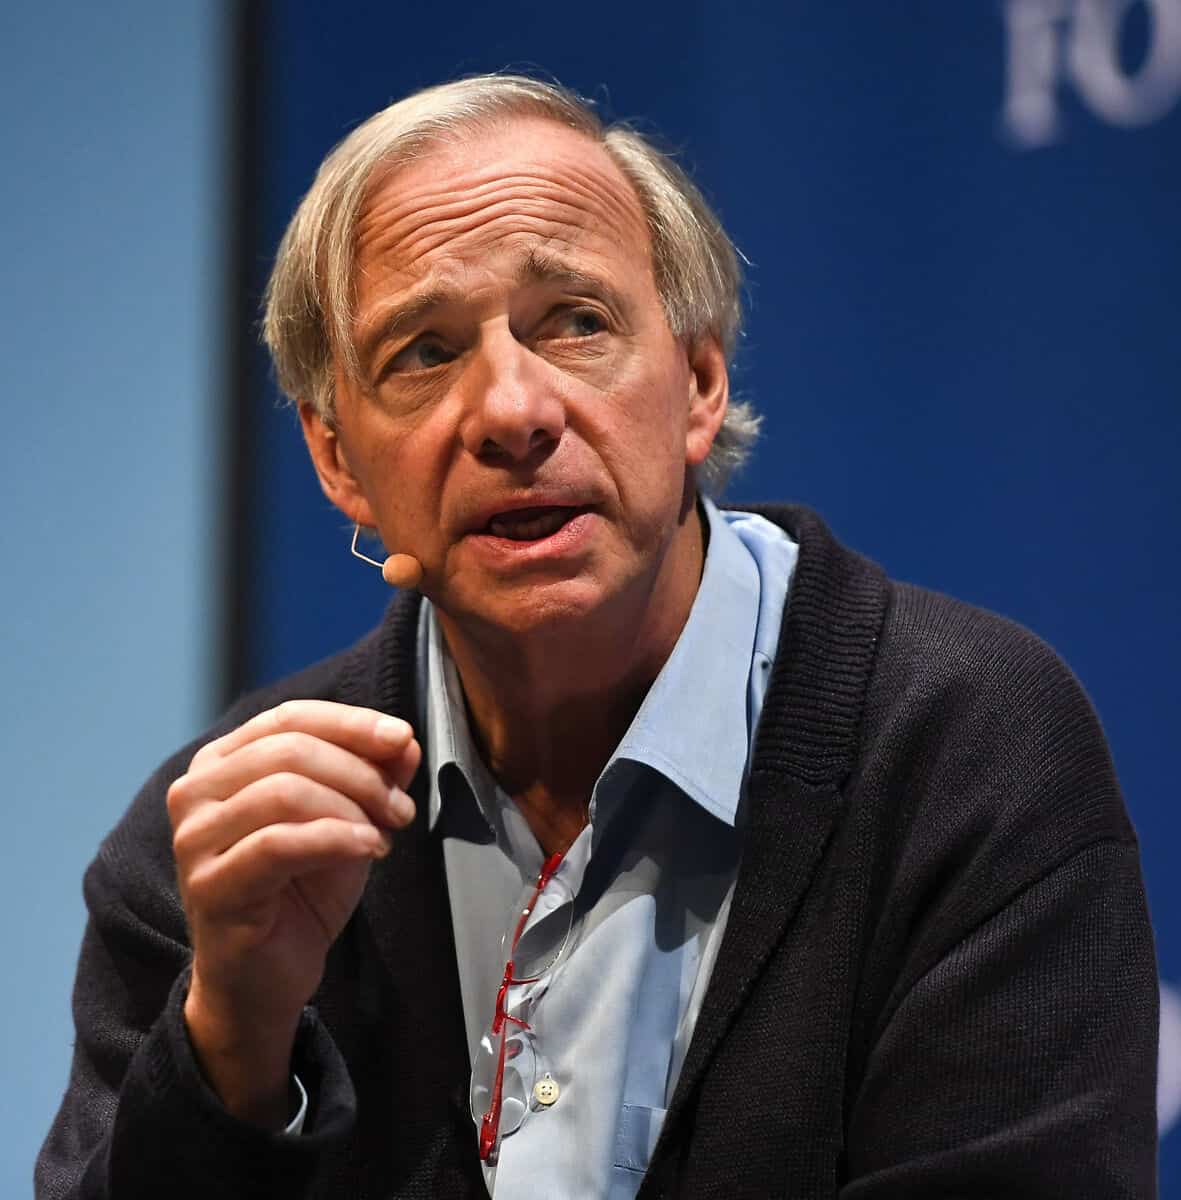 Ray Dalio net worth in Billionaires category